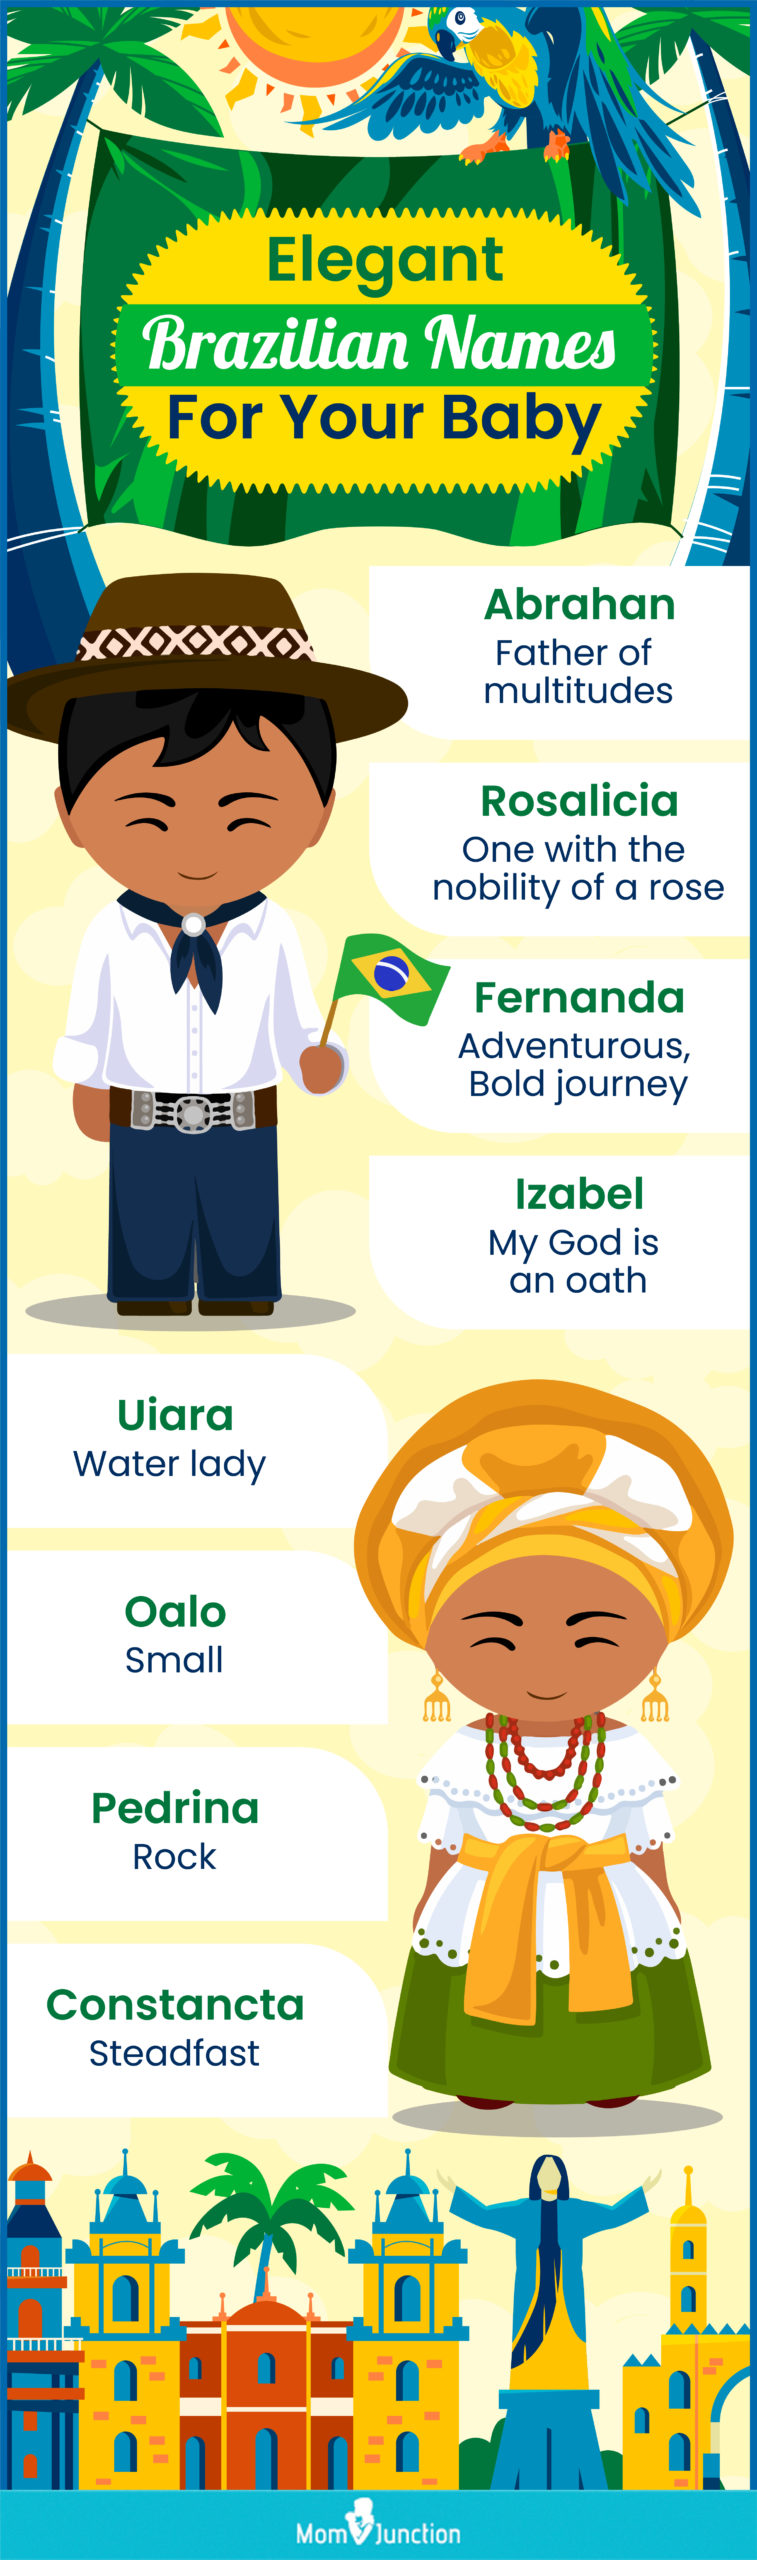 elegant brazilian names for your baby (infographic)